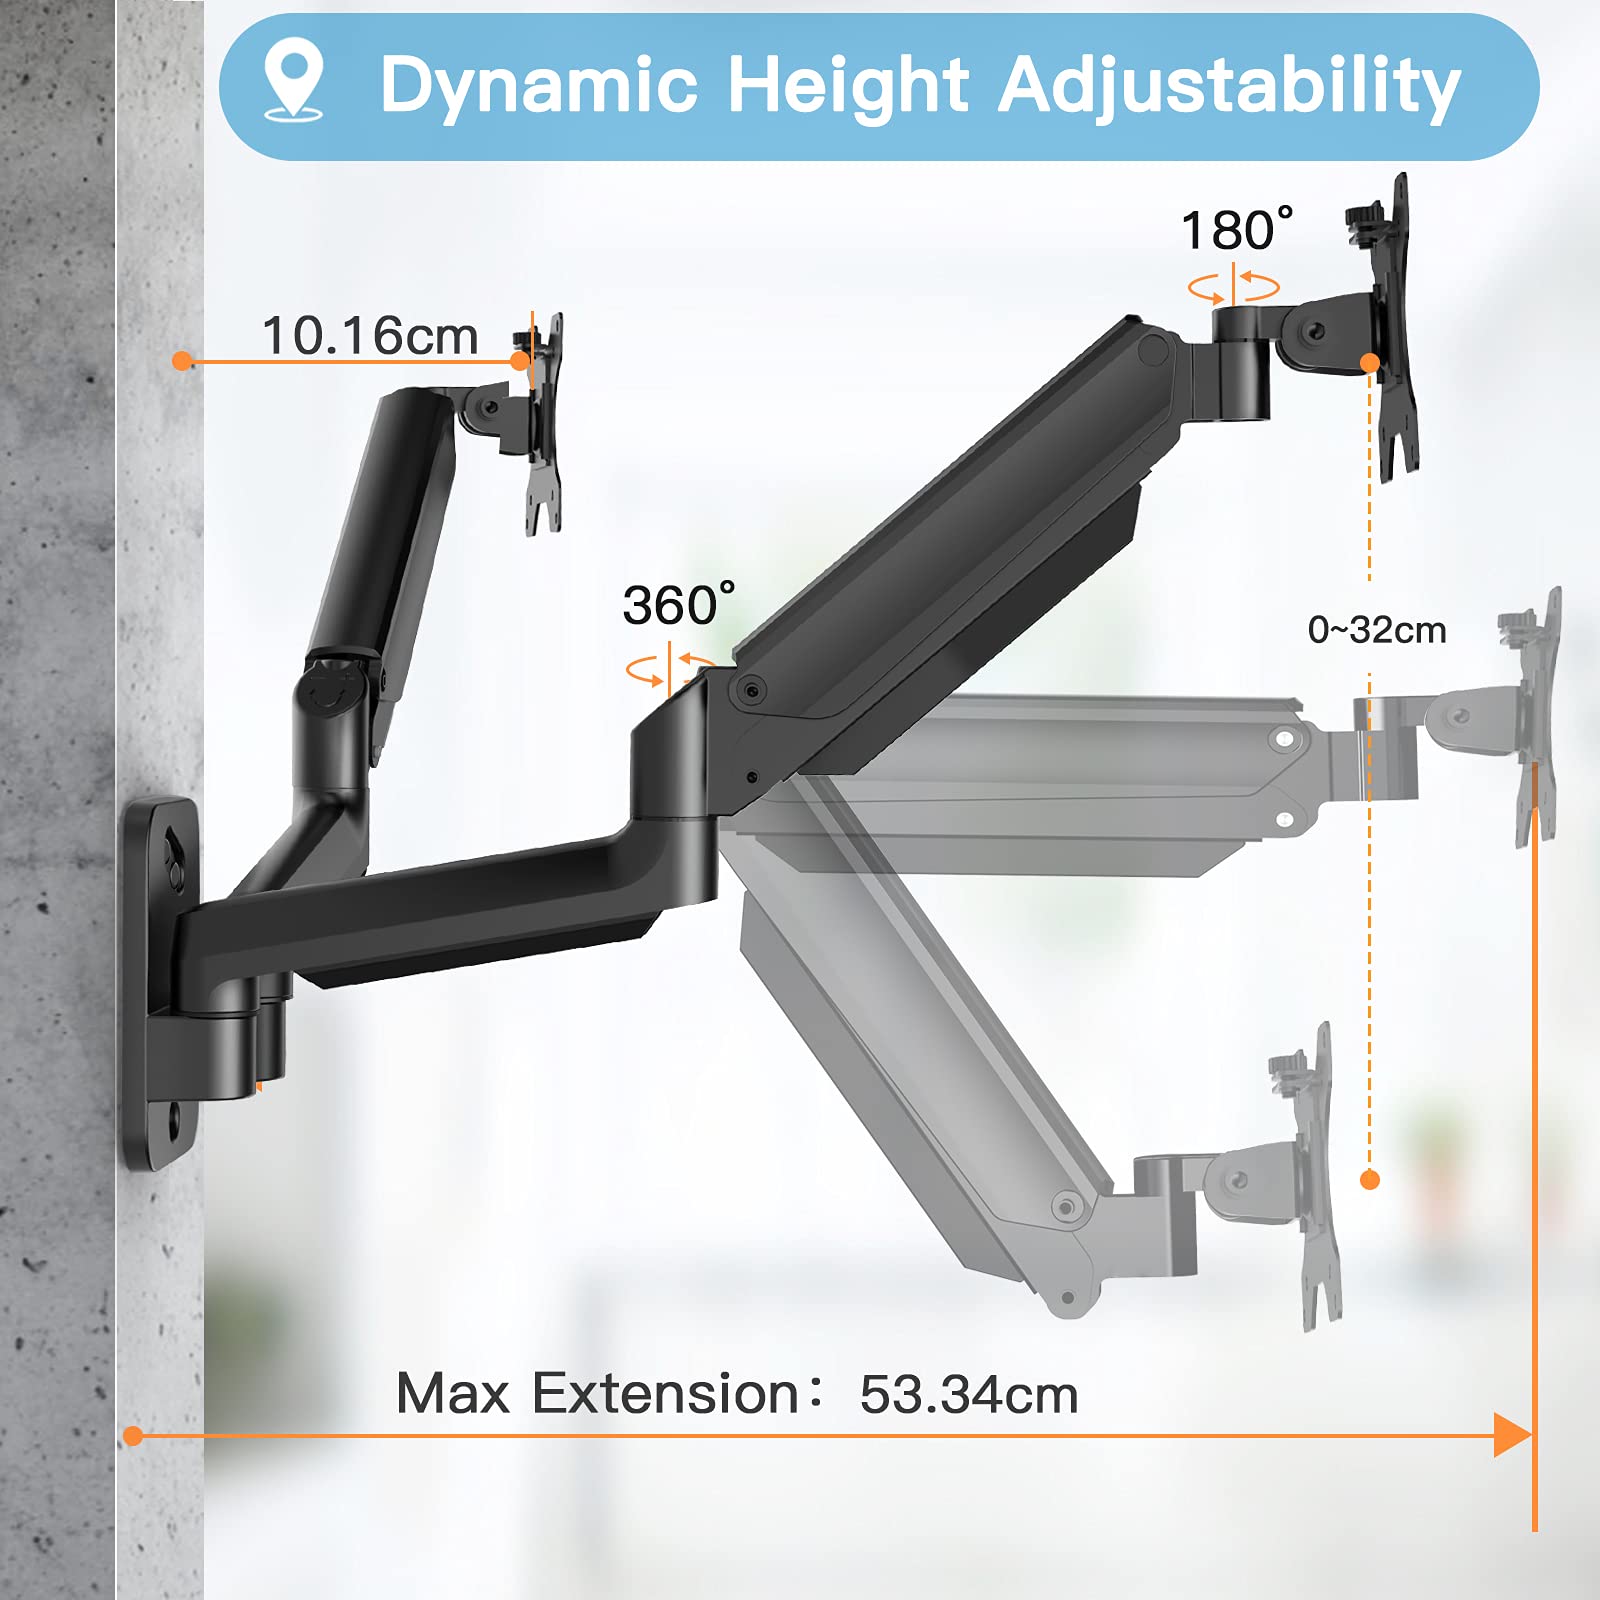 HUANUO Dual Monitor Wall Mount for 17 - 27 inch Screens, Wall Mounted Monitor Arm with Gas Spring Arm, Wall Mount Monitor Arm Support VESA 75/100mm, Load Capacity 3-8KG